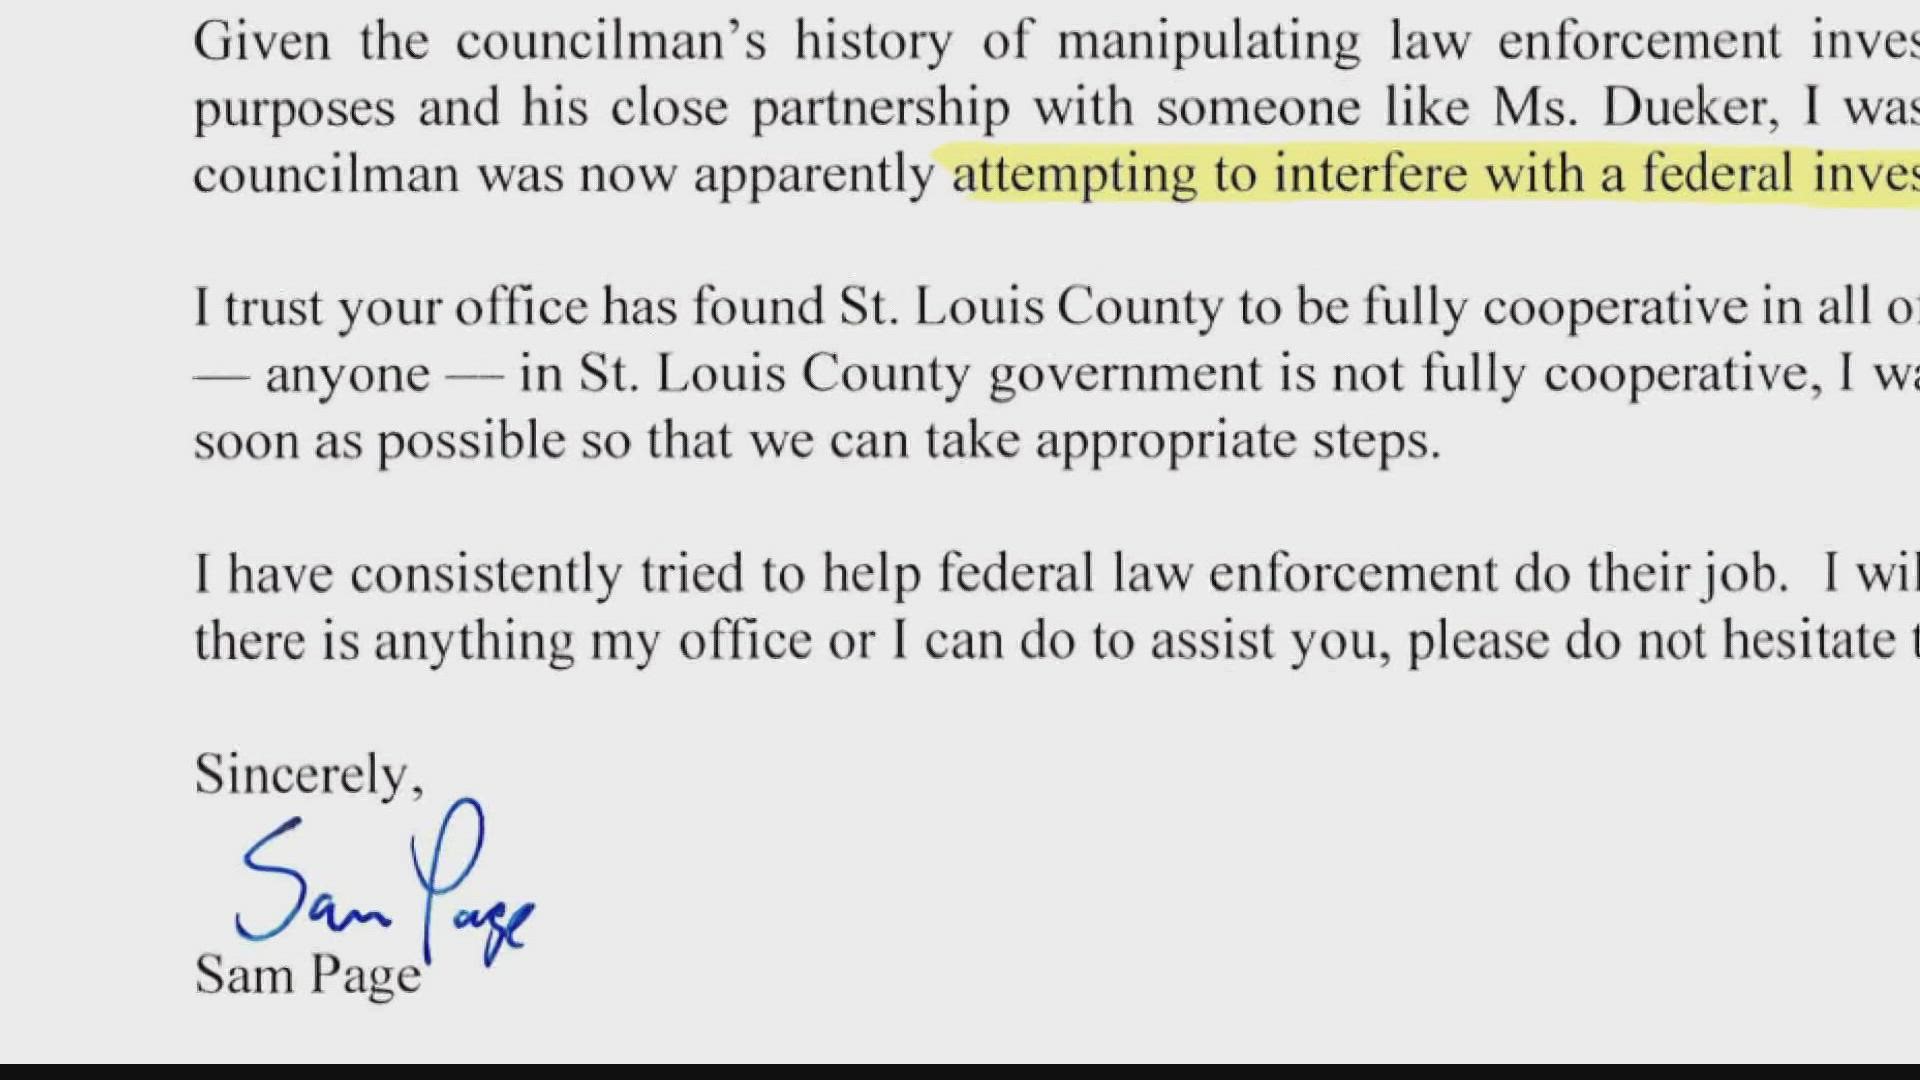 In a letter, Assistant U.S. Attorney Hal Goldsmith responded and confirmed Page's office was served grand jury subpoenas in an 'ongoing federal investigation'.